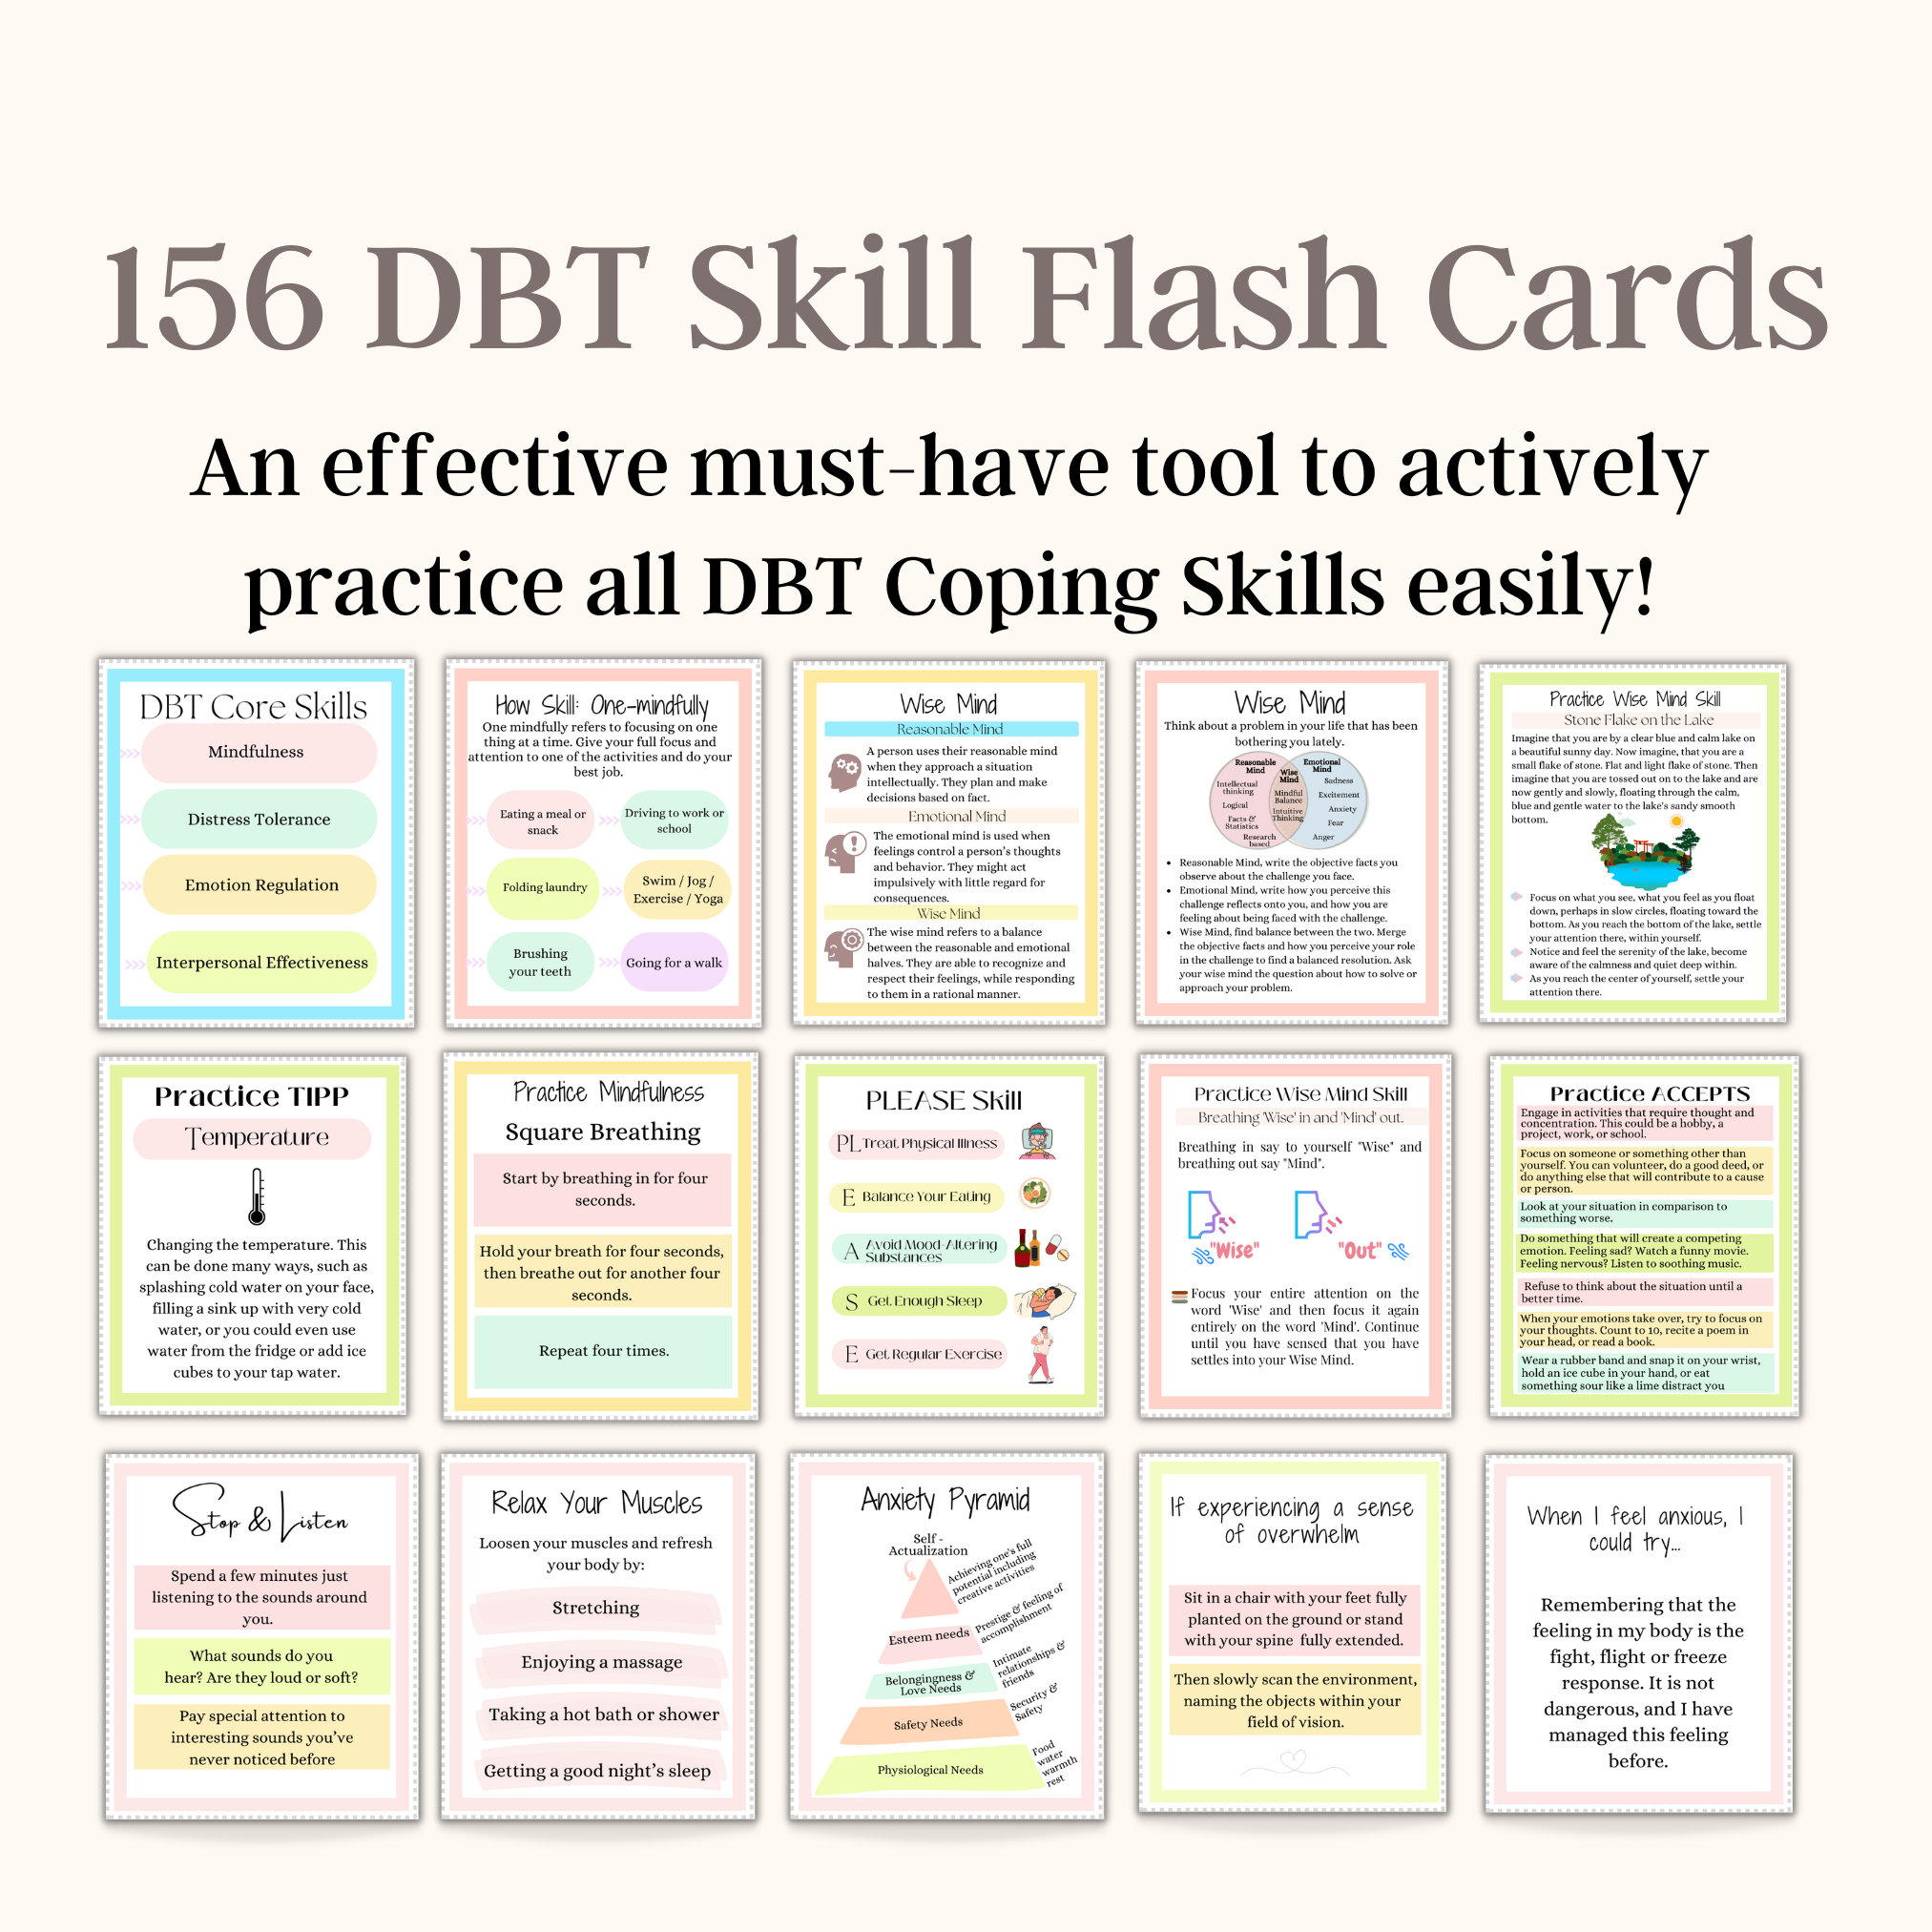 The Dialectical Behavior Therapy Skills Card Deck: 52 Practices to